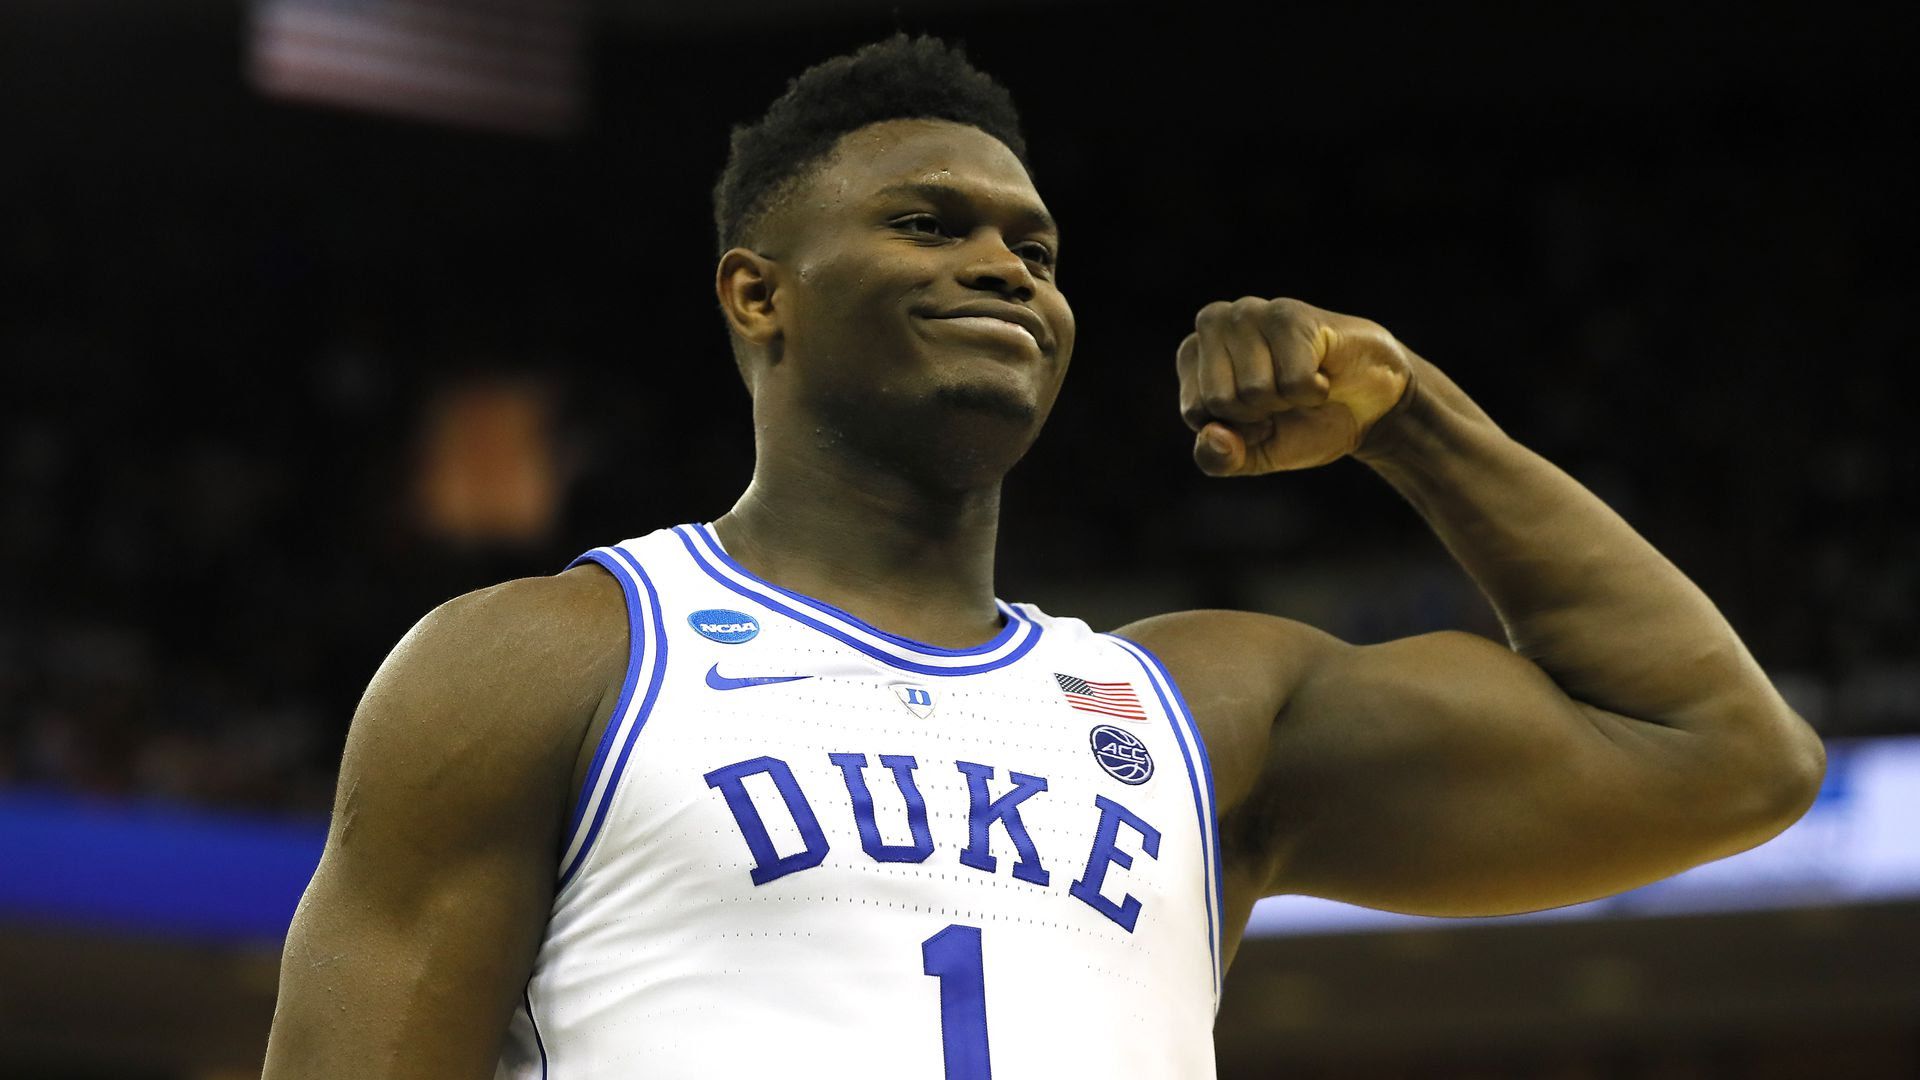 Zion Williamson in a Duke jersey as he flexes his arm 